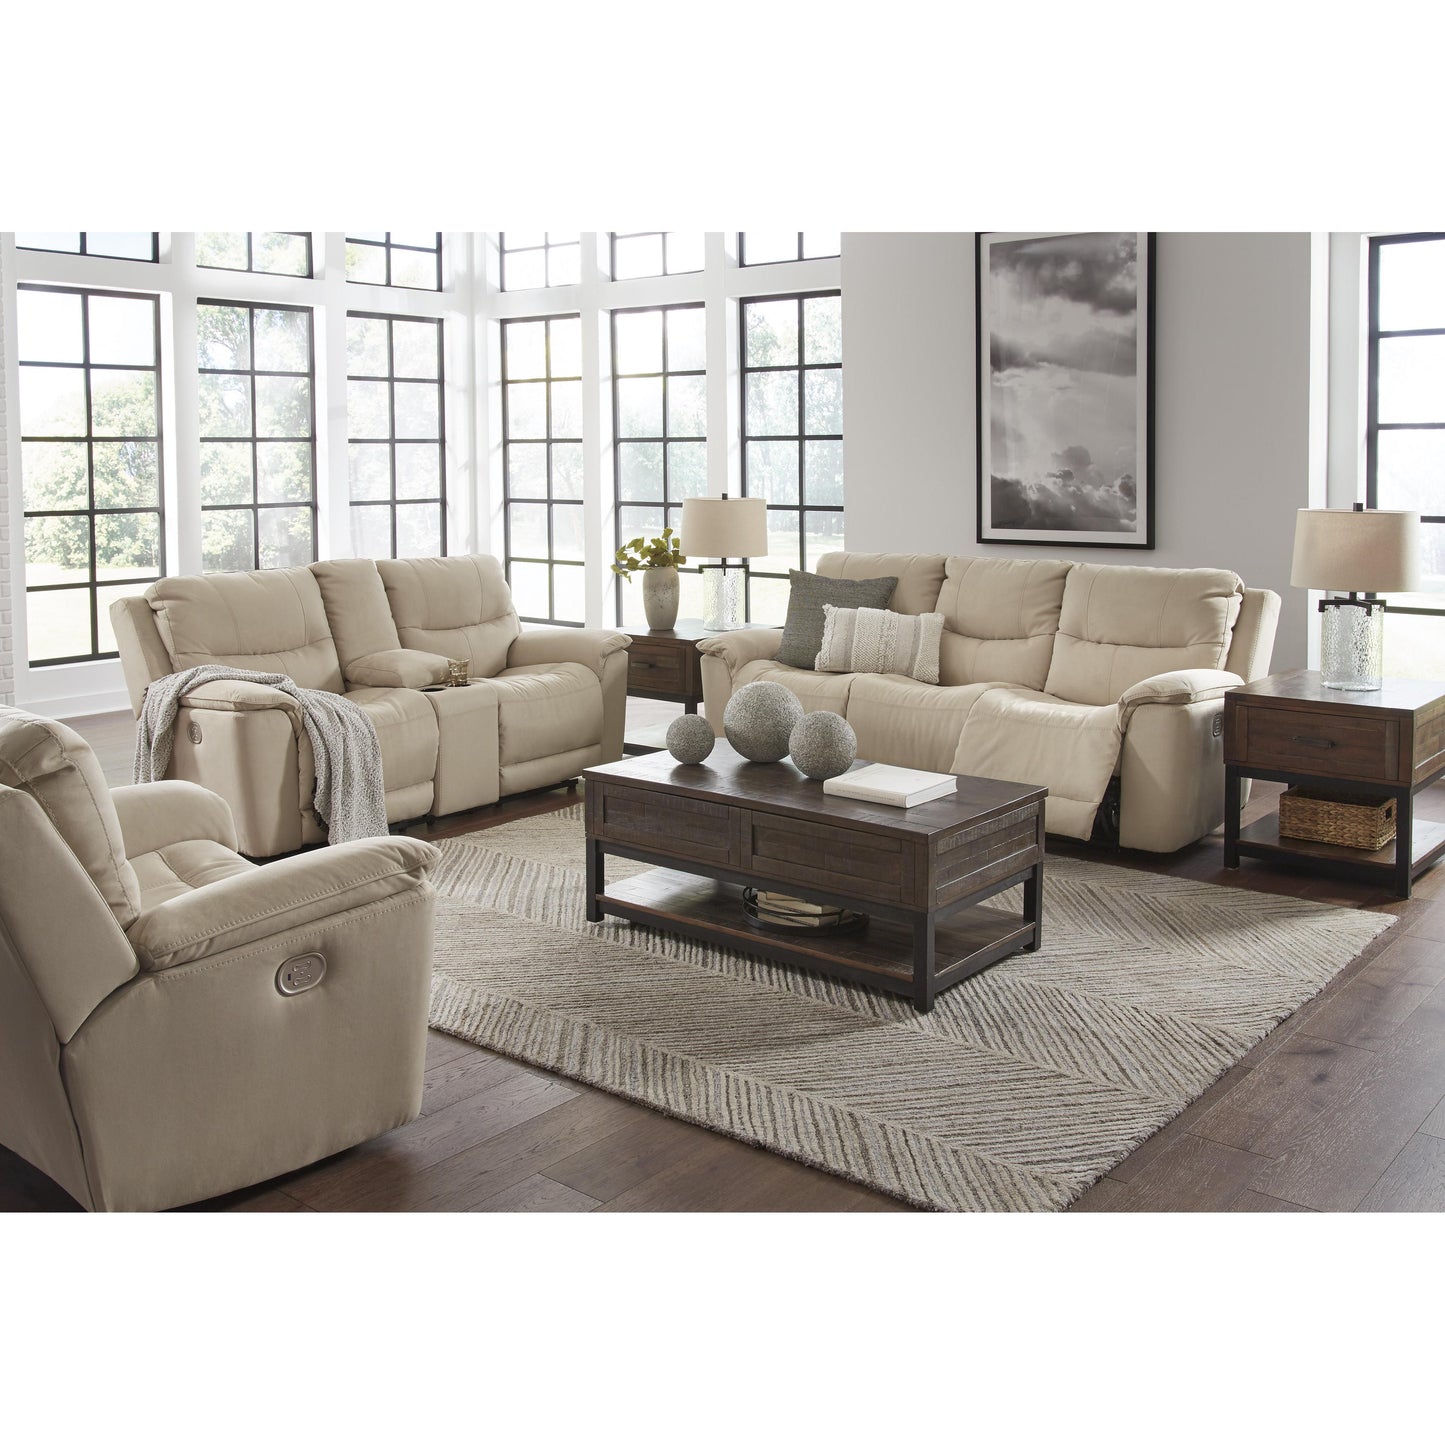 Signature Design by Ashley Next-Gen Gaucho Power Reclining Leather Look Sofa 6080715 IMAGE 14